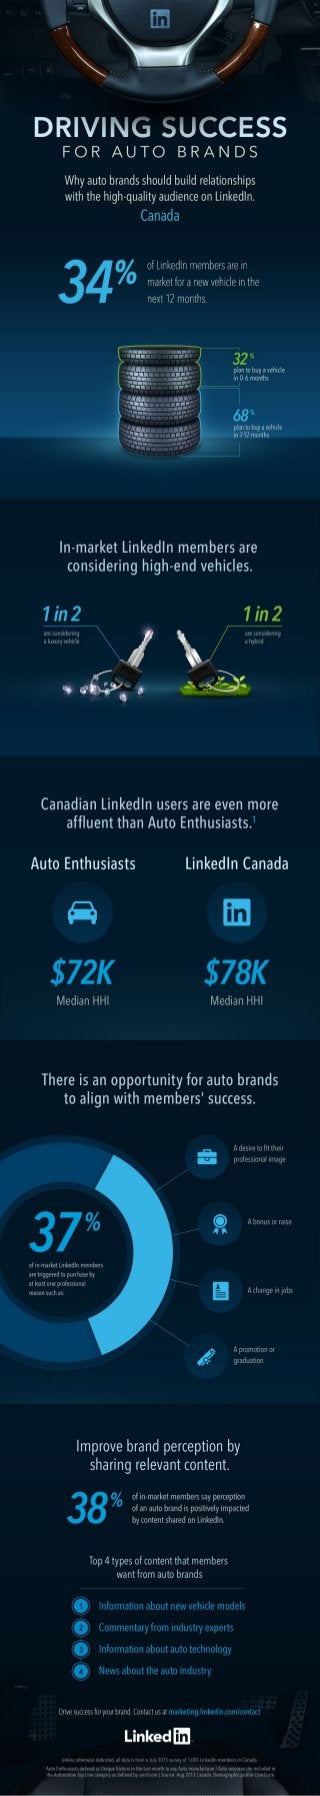 Canadian Automotive Research Infographic